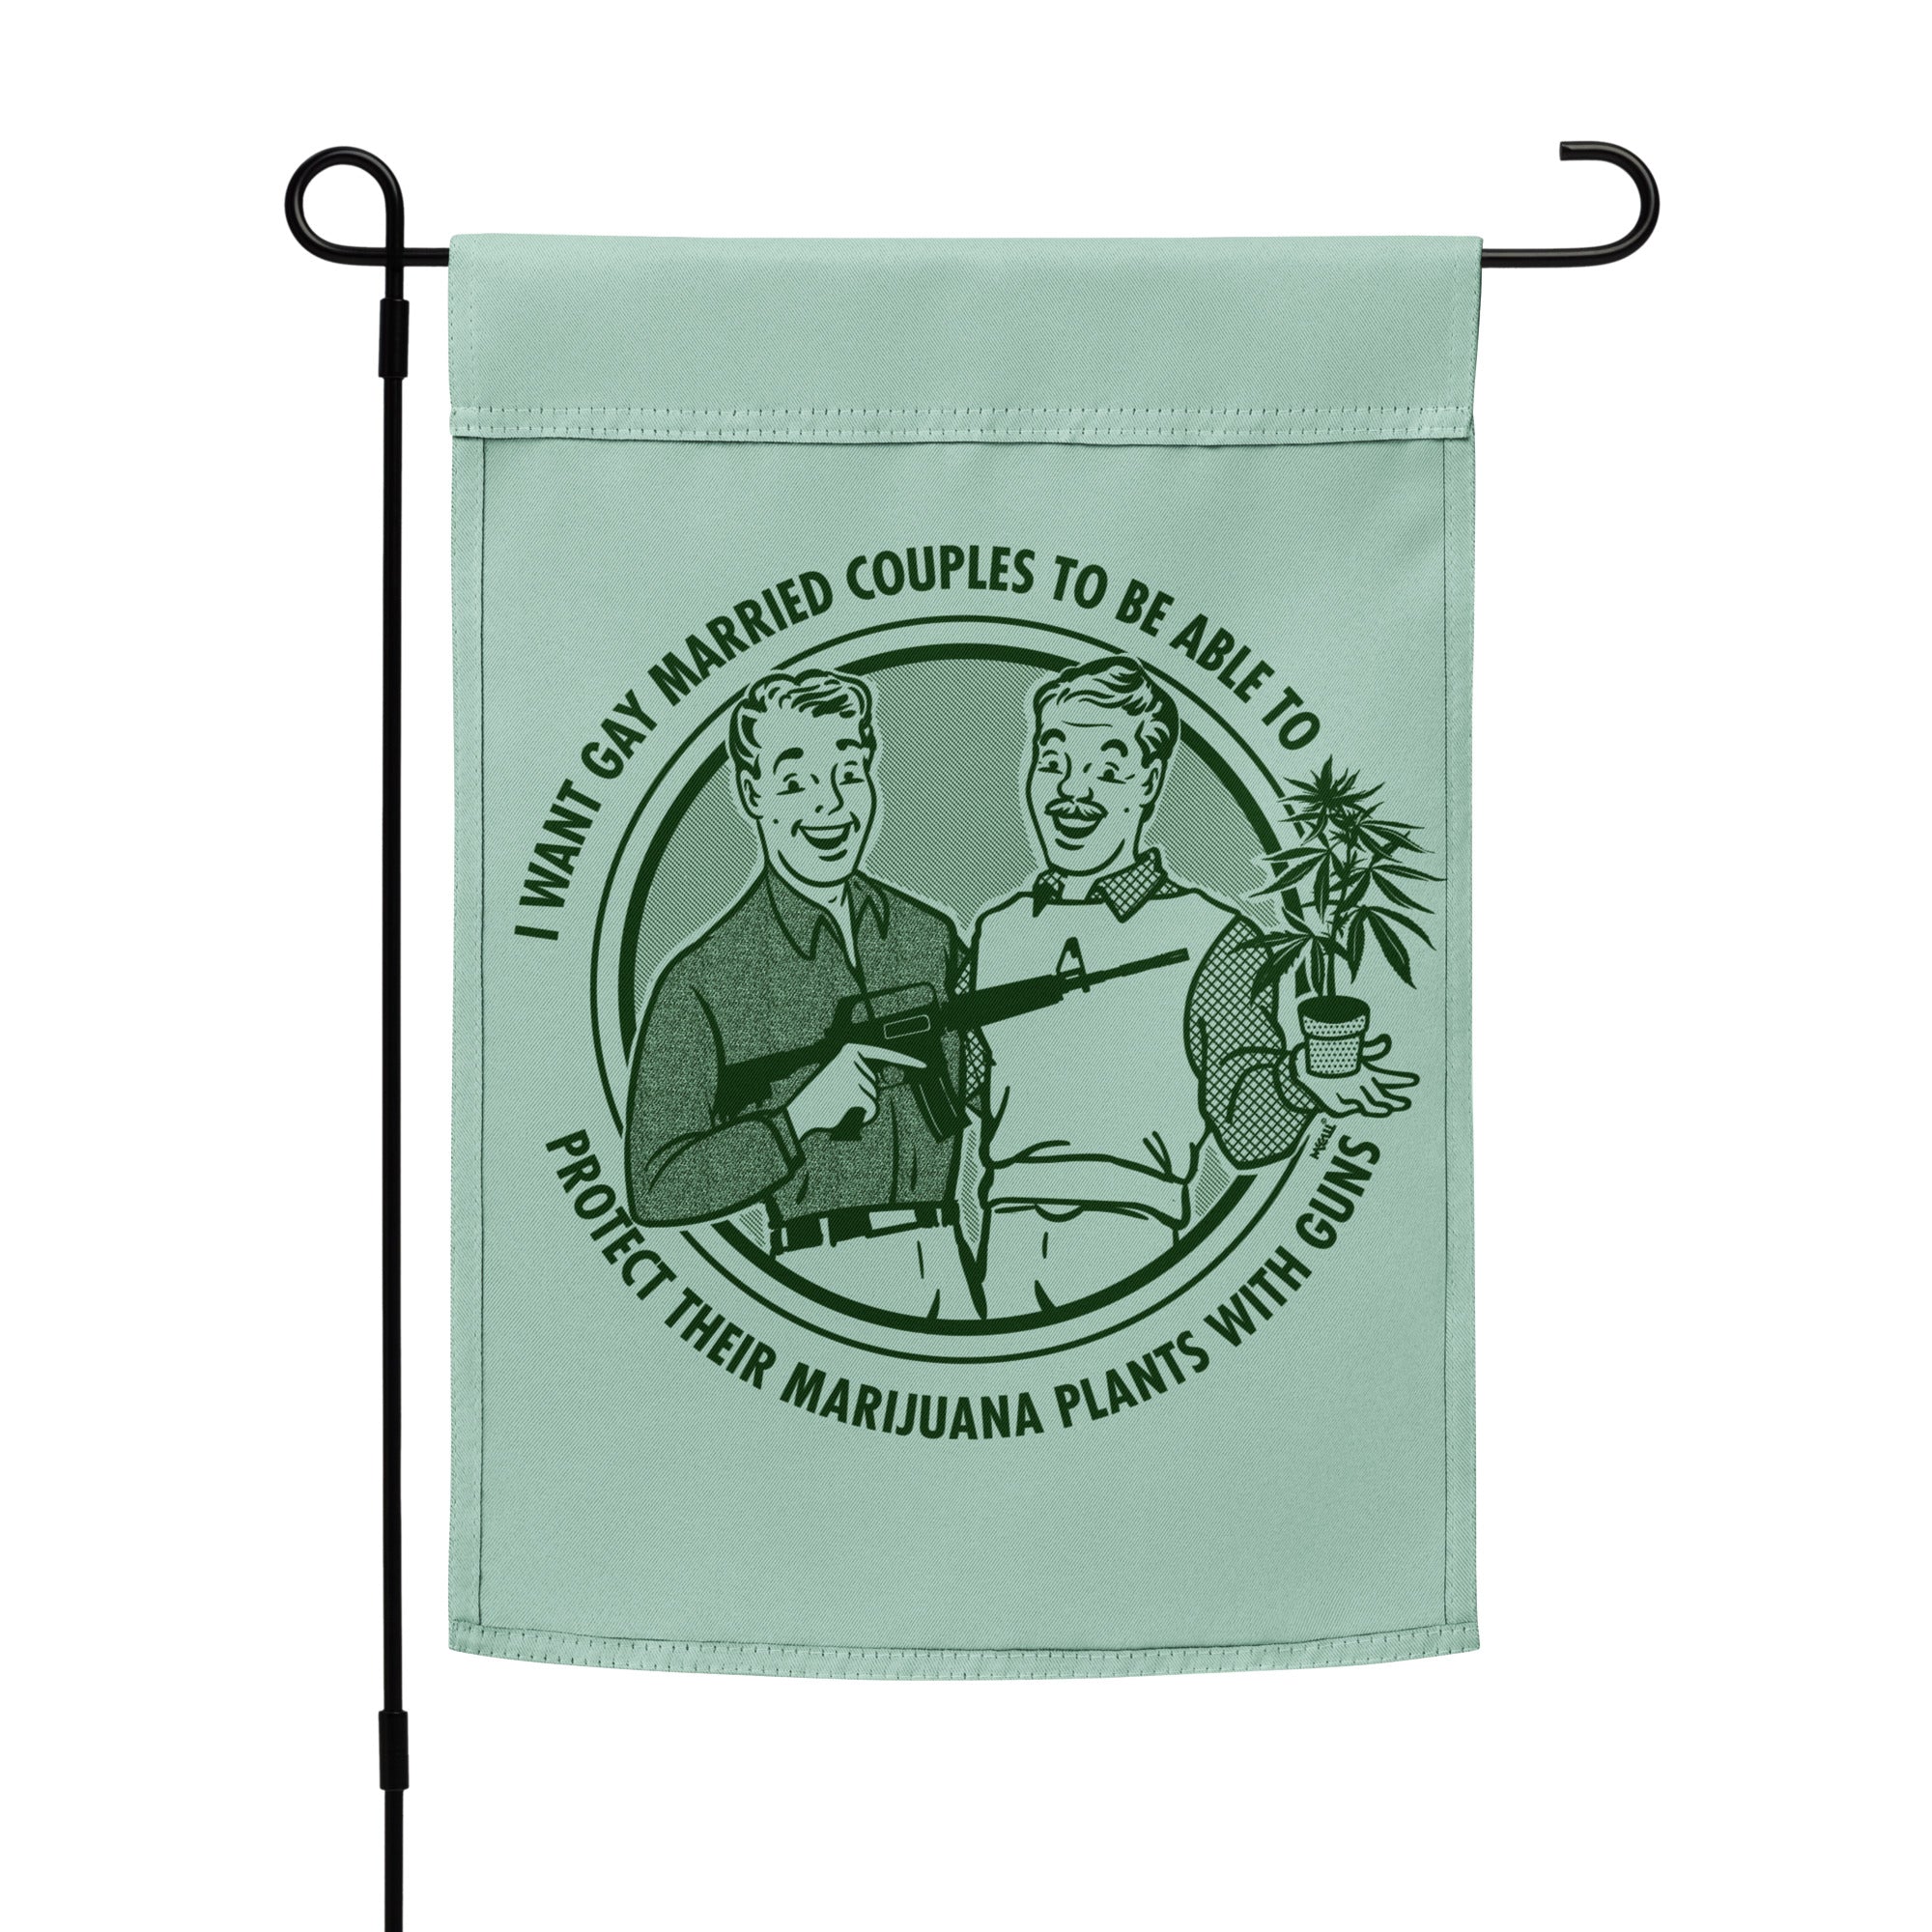 I Want Gay Married Couples to Protect their Pot Plants with Guns Garden flag